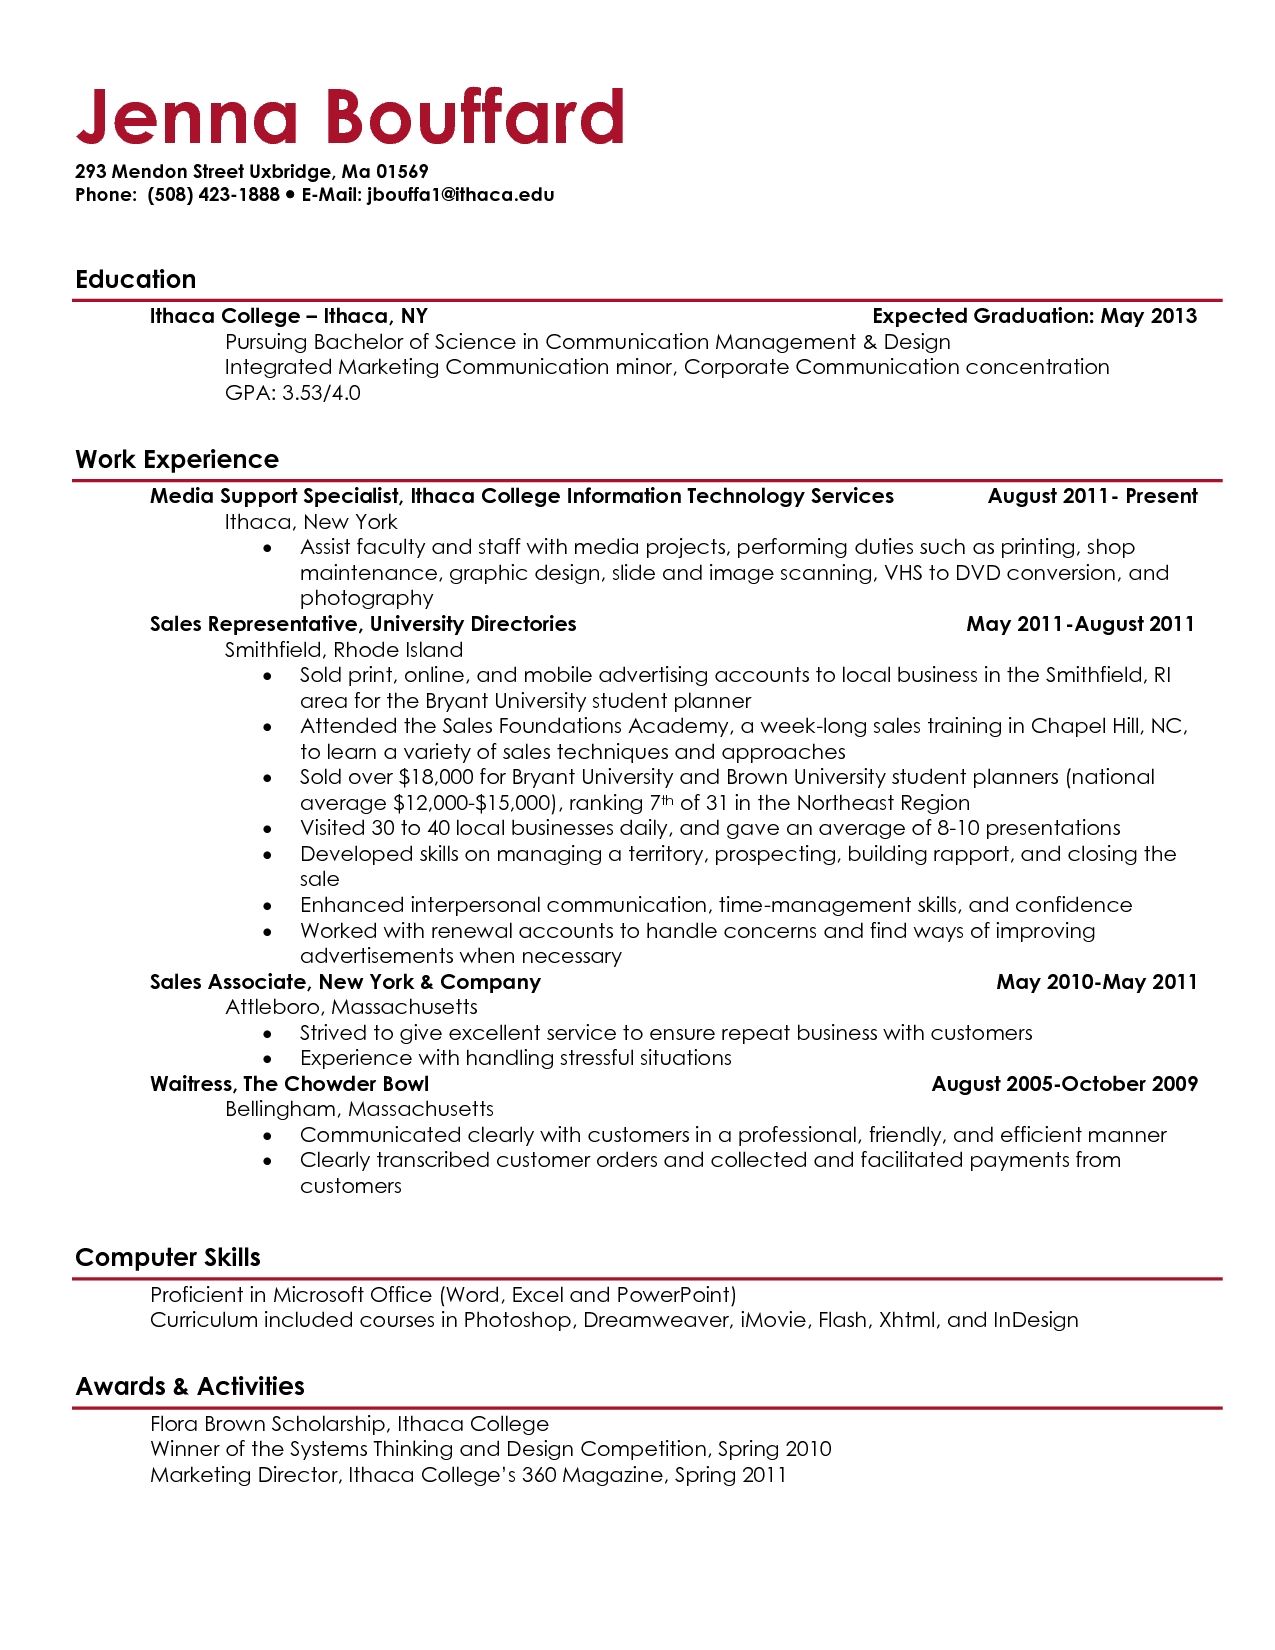 job resume examples for college students good resume examples for